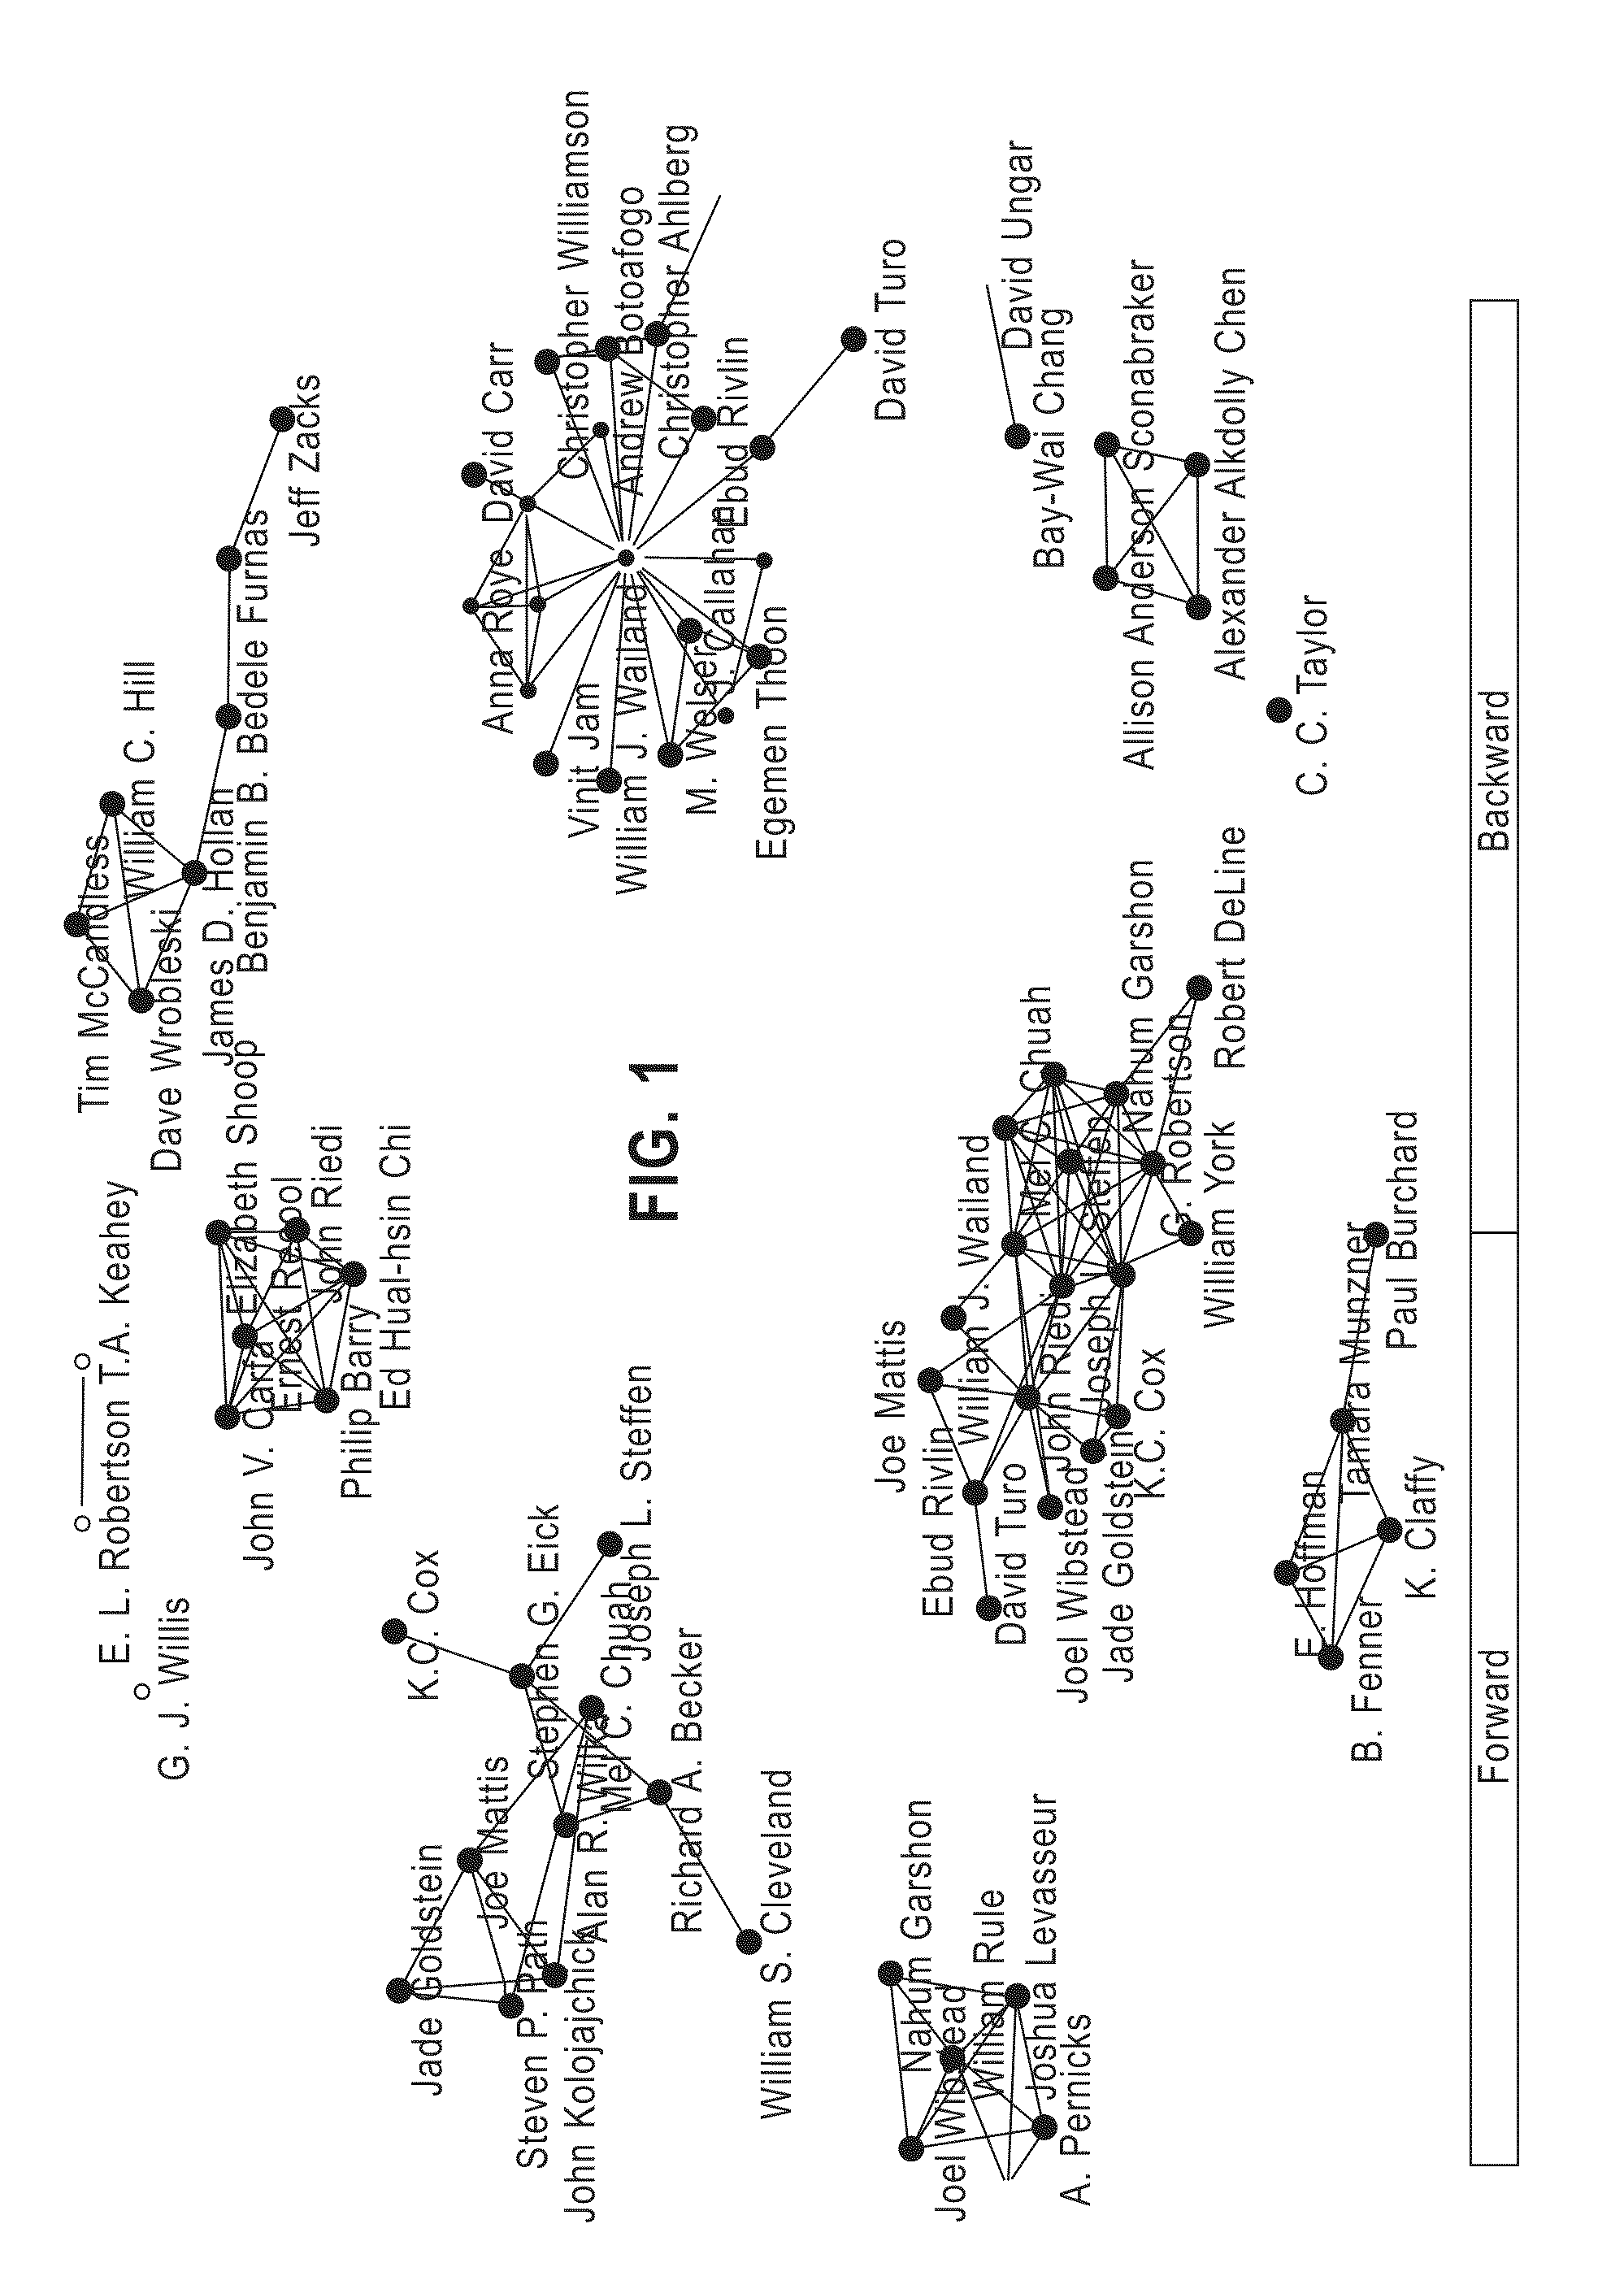 Method and apparatus for processing network visualization